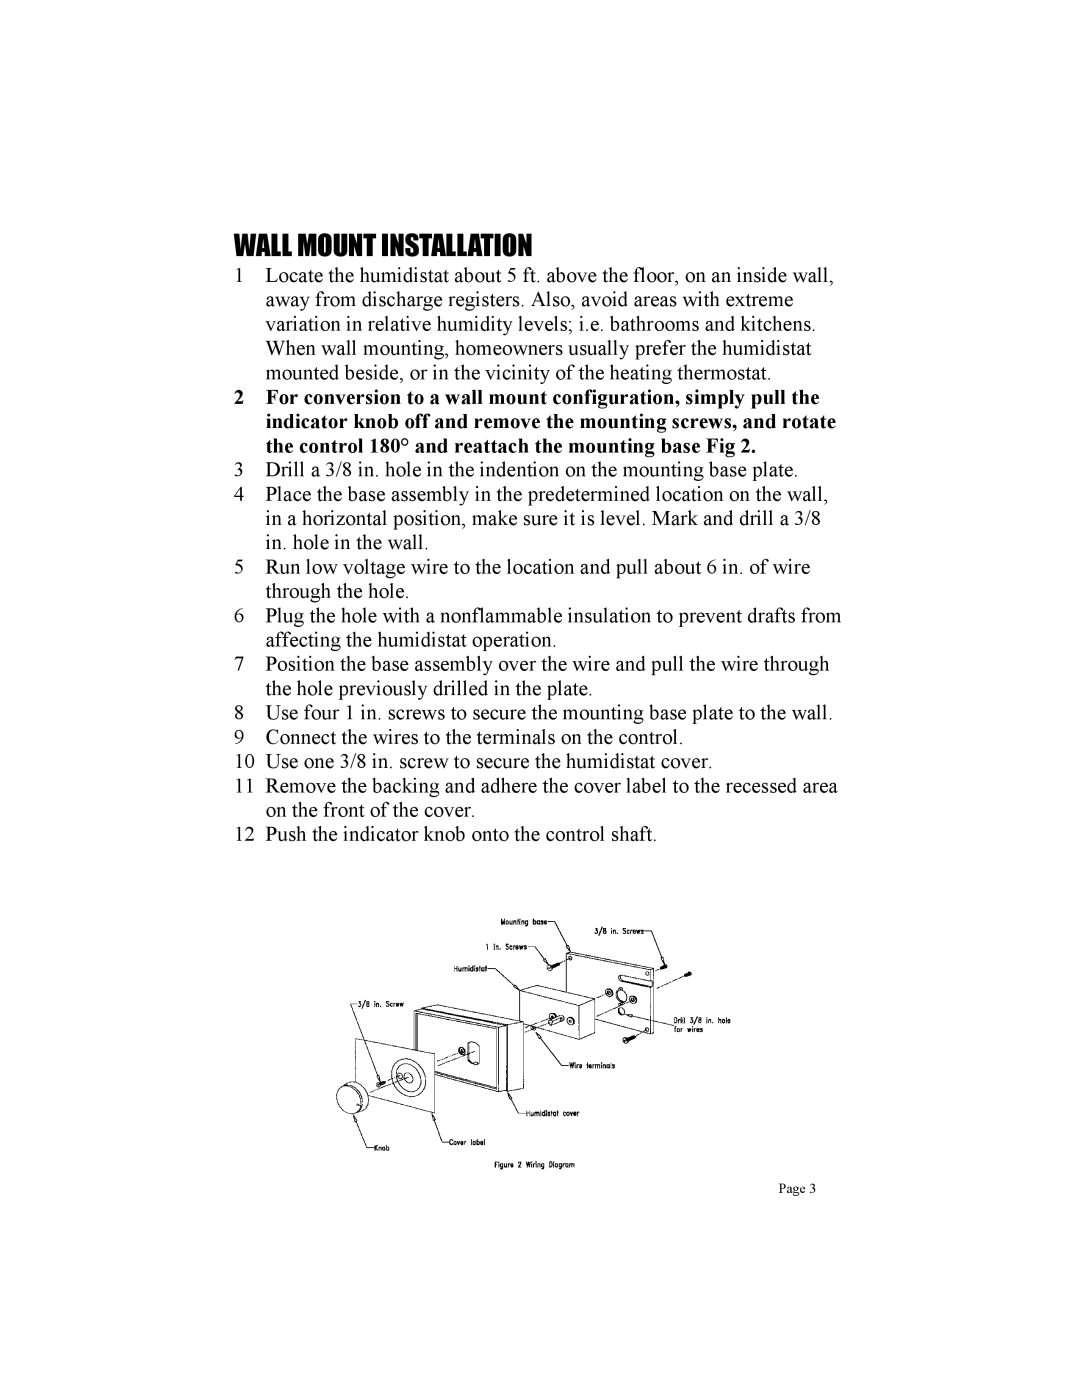 Skuttle Indoor Air Quality Products SK0-0055-001 installation instructions Wall Mount Installation 